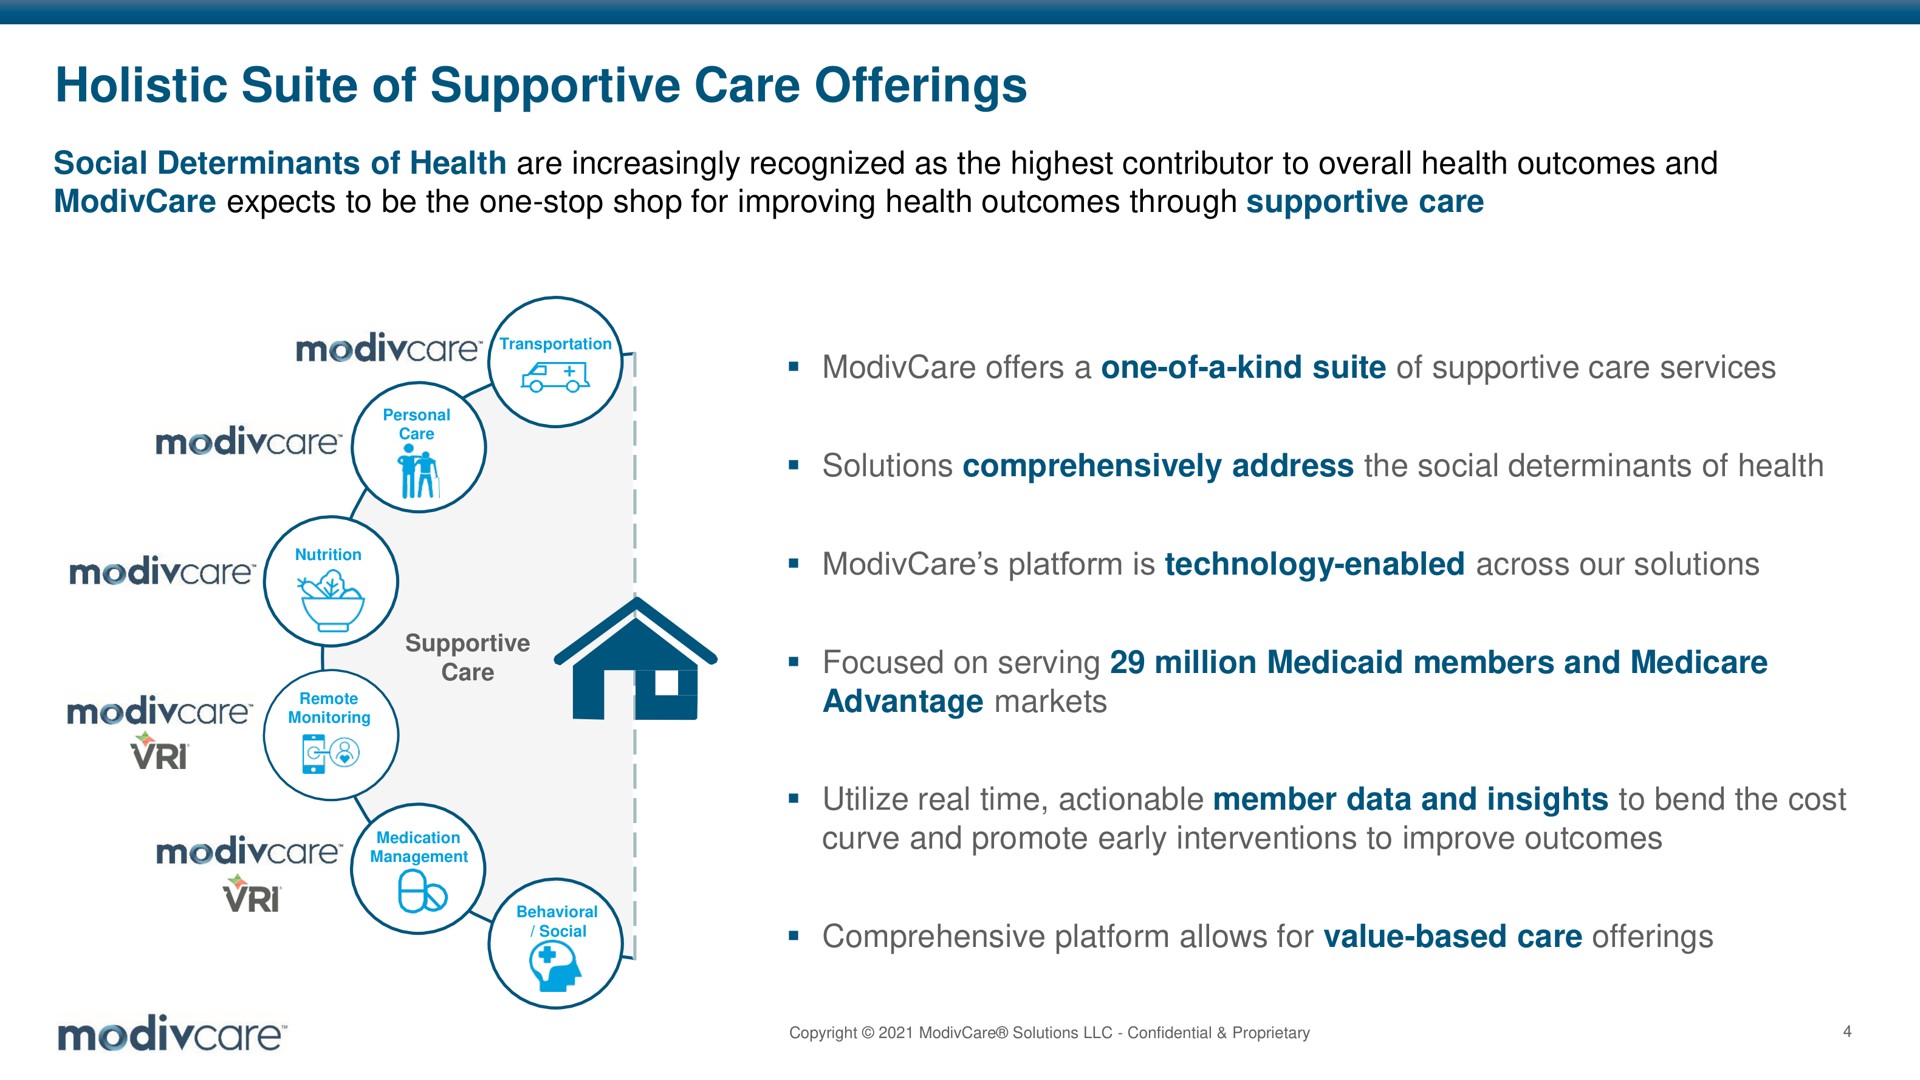 holistic suite of supportive care offerings | ModivCare